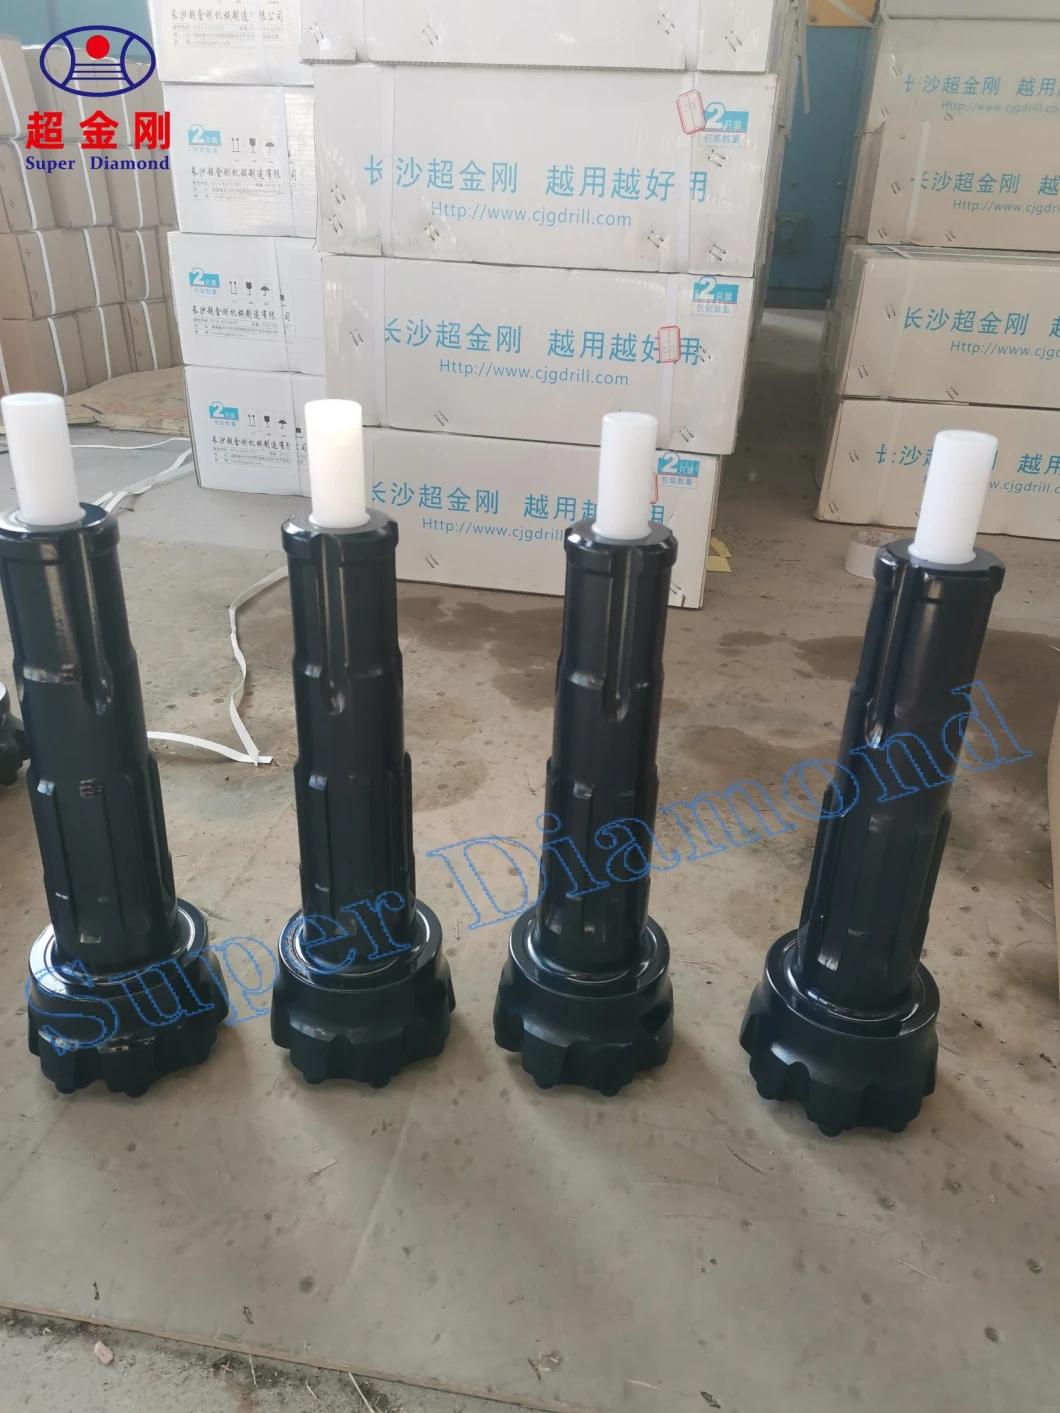 China Factory High Quality Rock Drilling DTH Bit for 5inch Hammer DHD350 for Mining